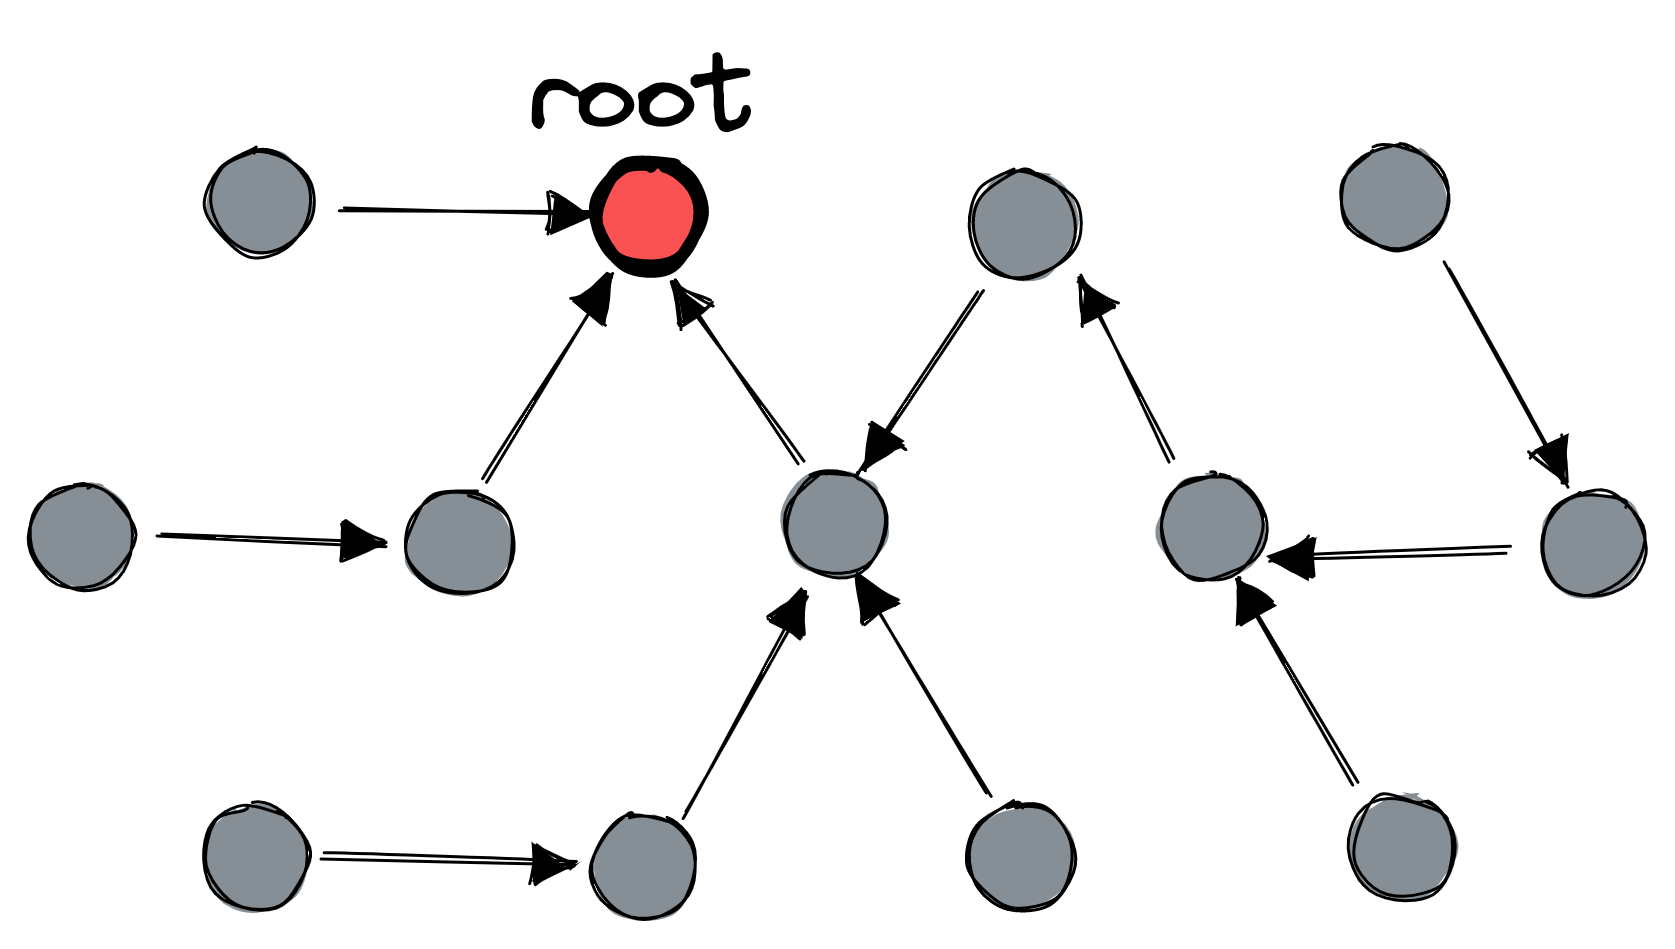 The same nodes, now arranged into a tree with one root.